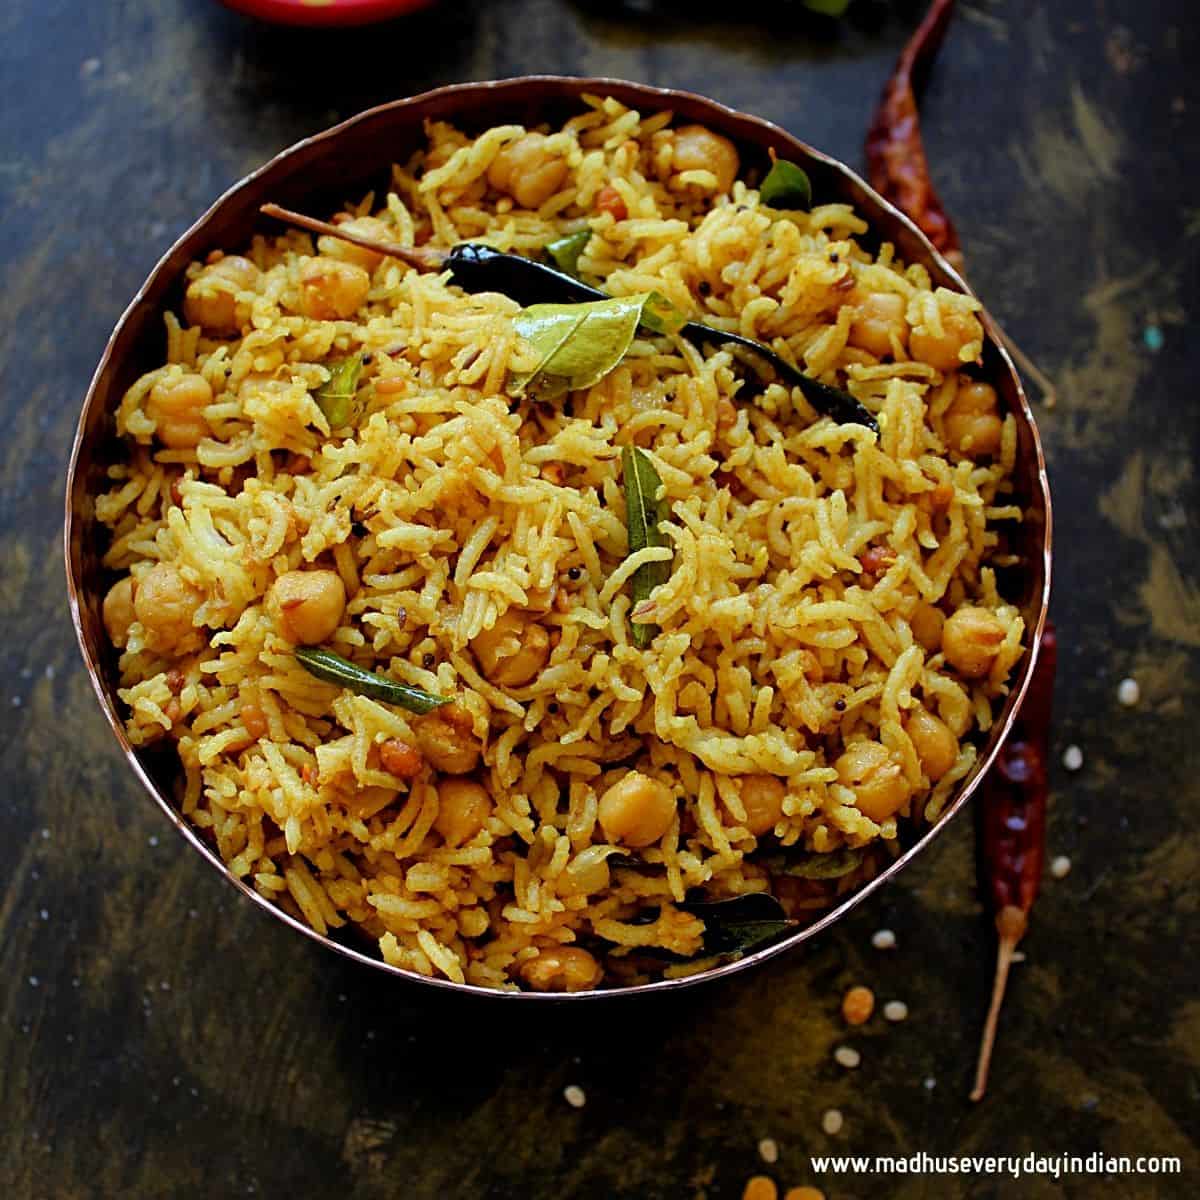 Pulihora is a very famous dish of Andhra Pradesh